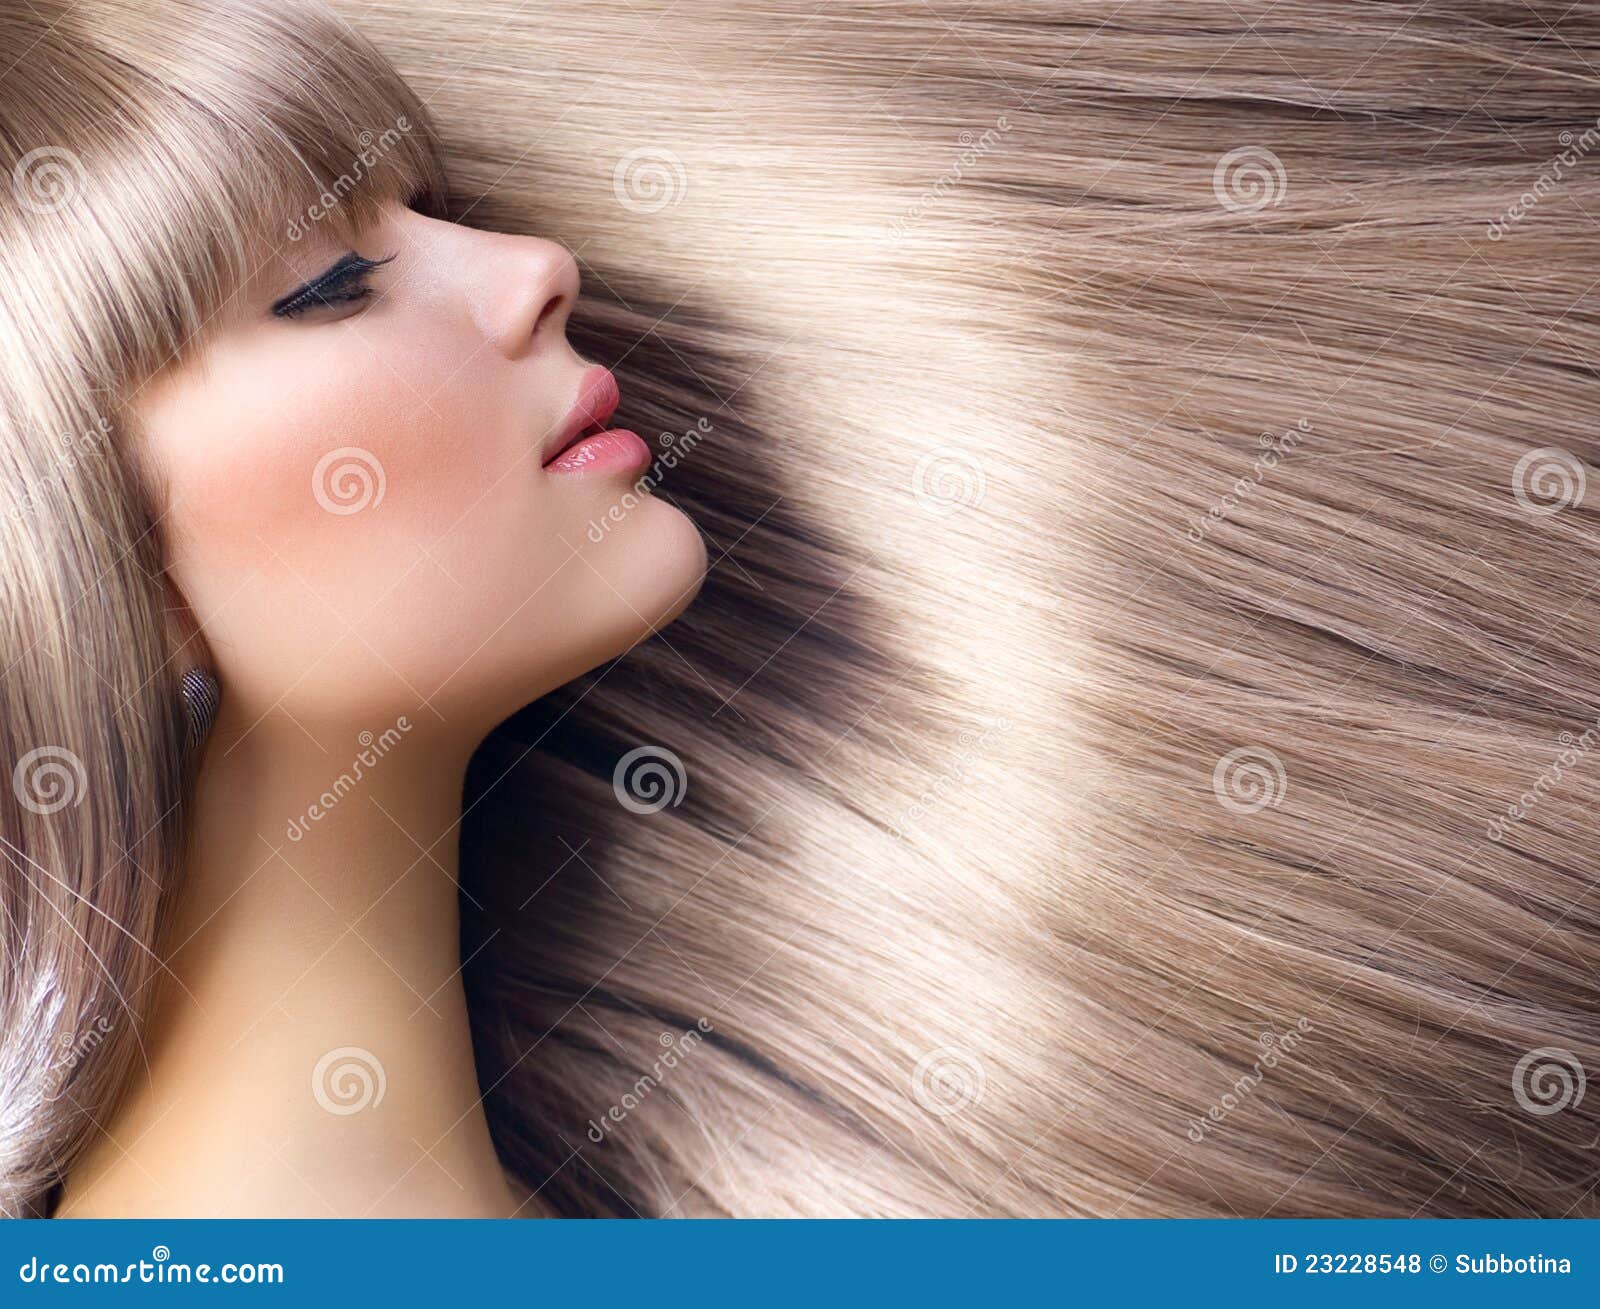 Free Images of Blond Hair - wide 4